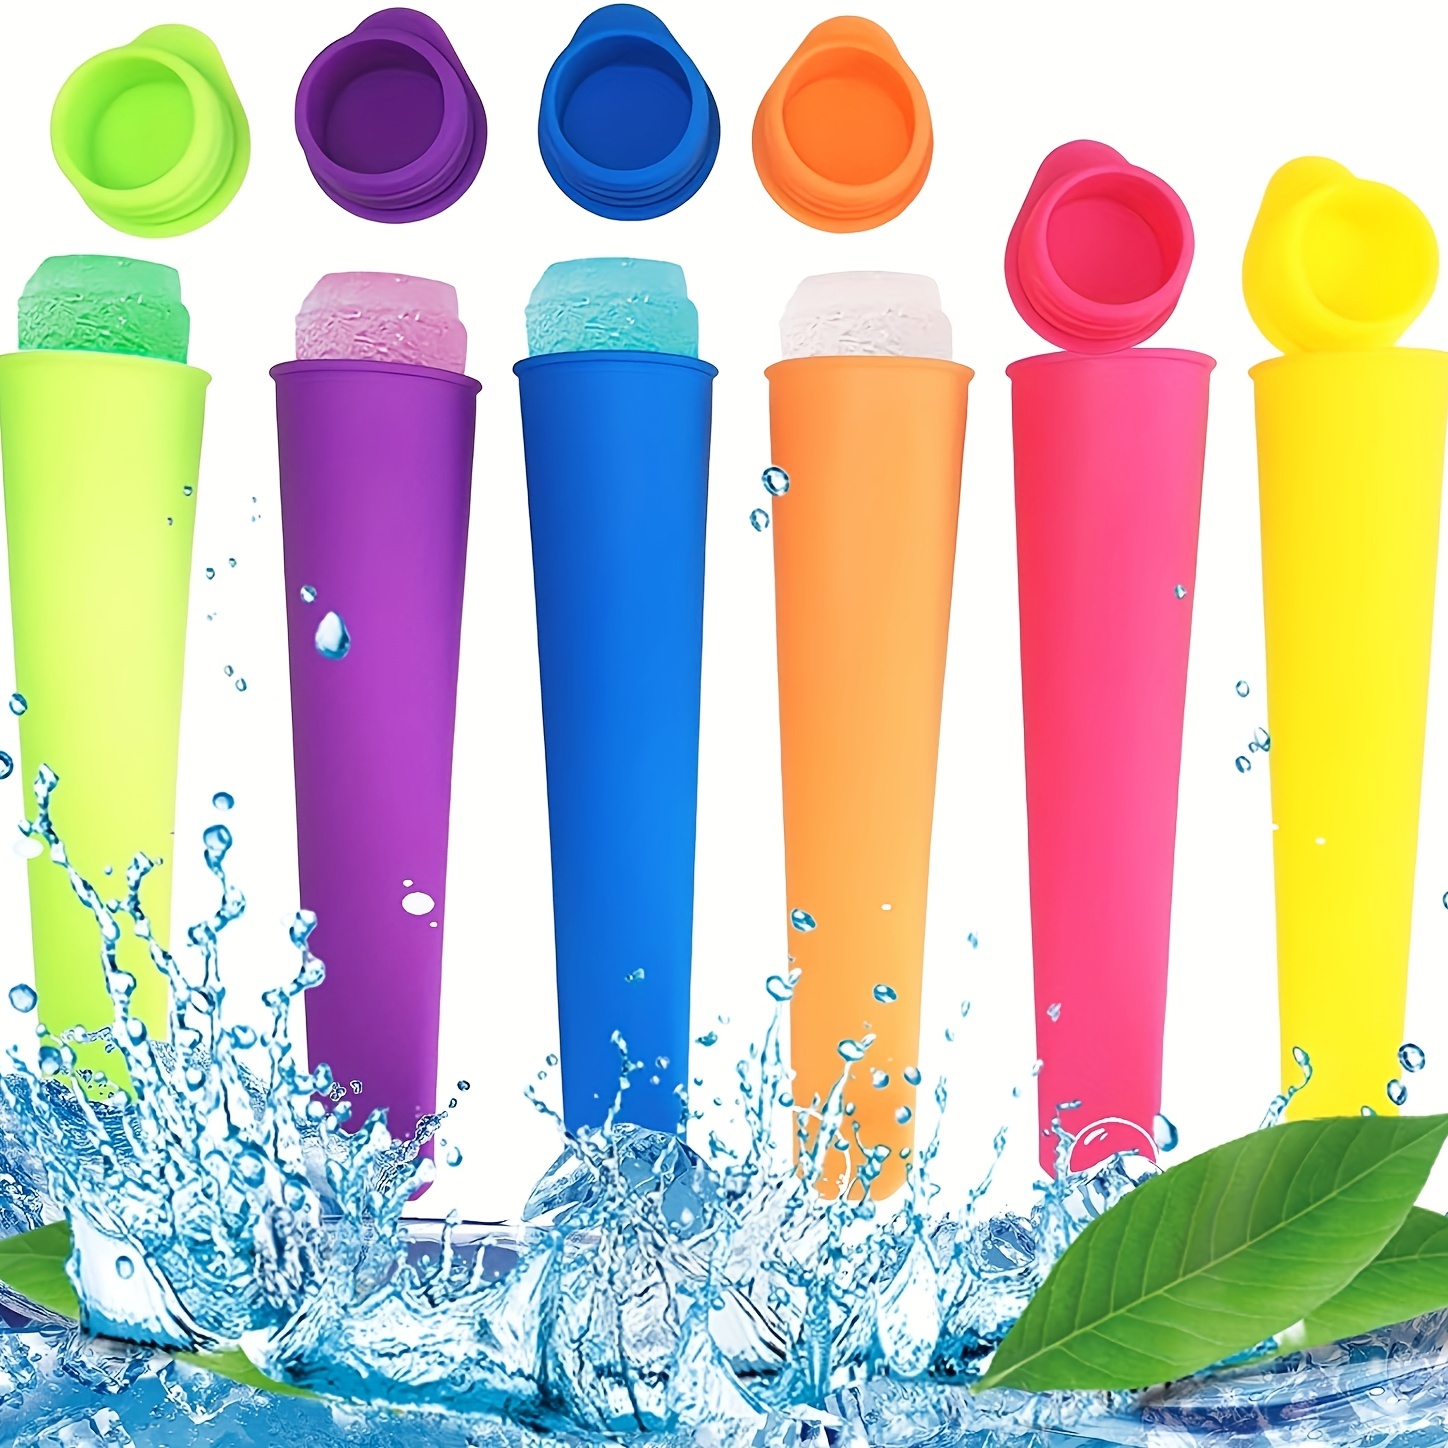 

1pc/6pcs, Popsicles Molds, Reusable Baby Silicone Popsical Molds, Ice Pop Molds Frozen Popsicle Maker With Lid For Diy Popsicles/yogurt Sticks/jelly (6 Color Available)